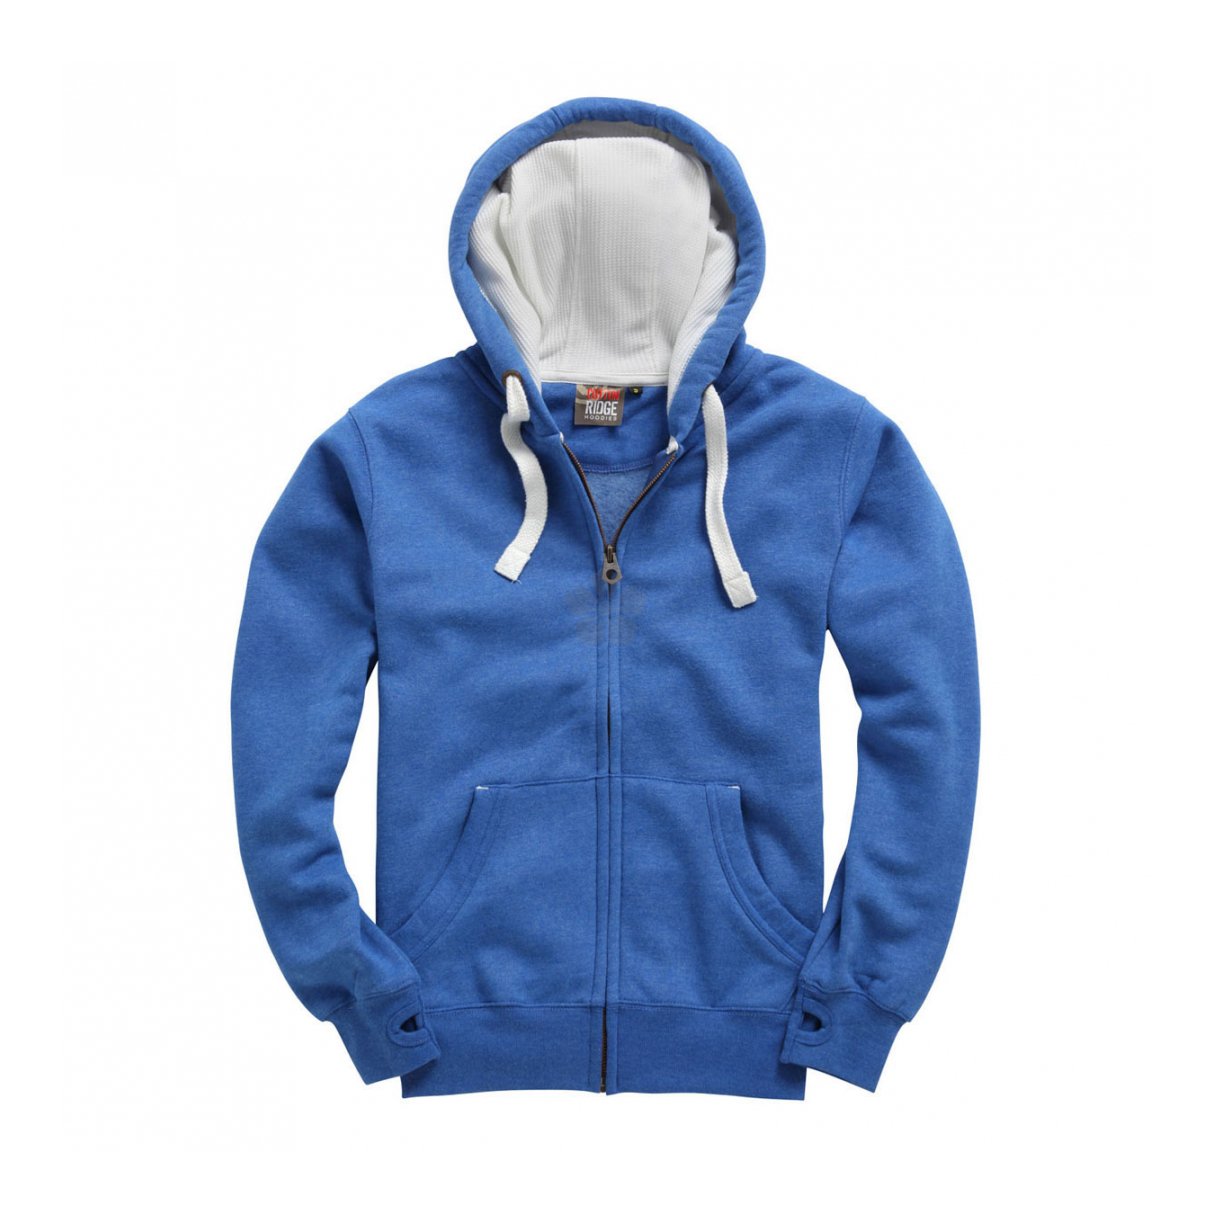 Promotional Zipped Premium Unisex Hoodie, Personalised by MoJo Promotions